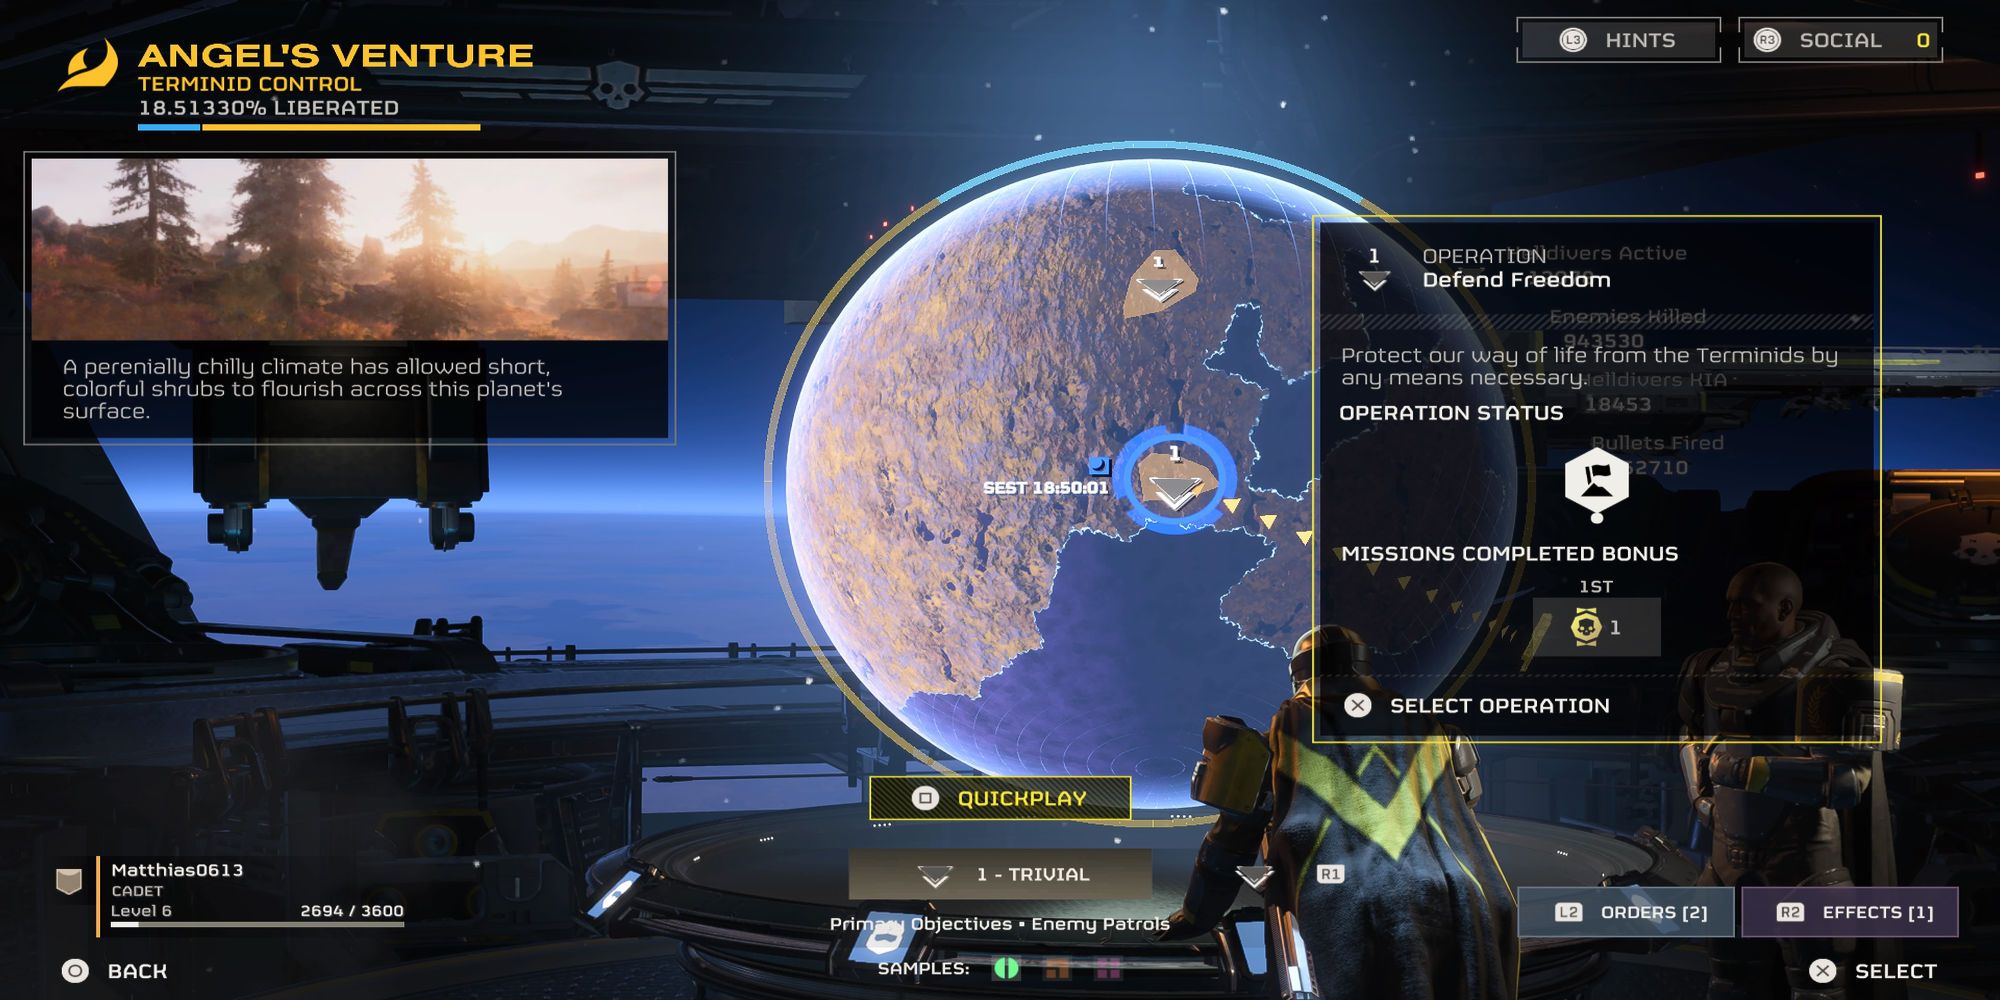 A player selects a Level 1 (Trivial) mission